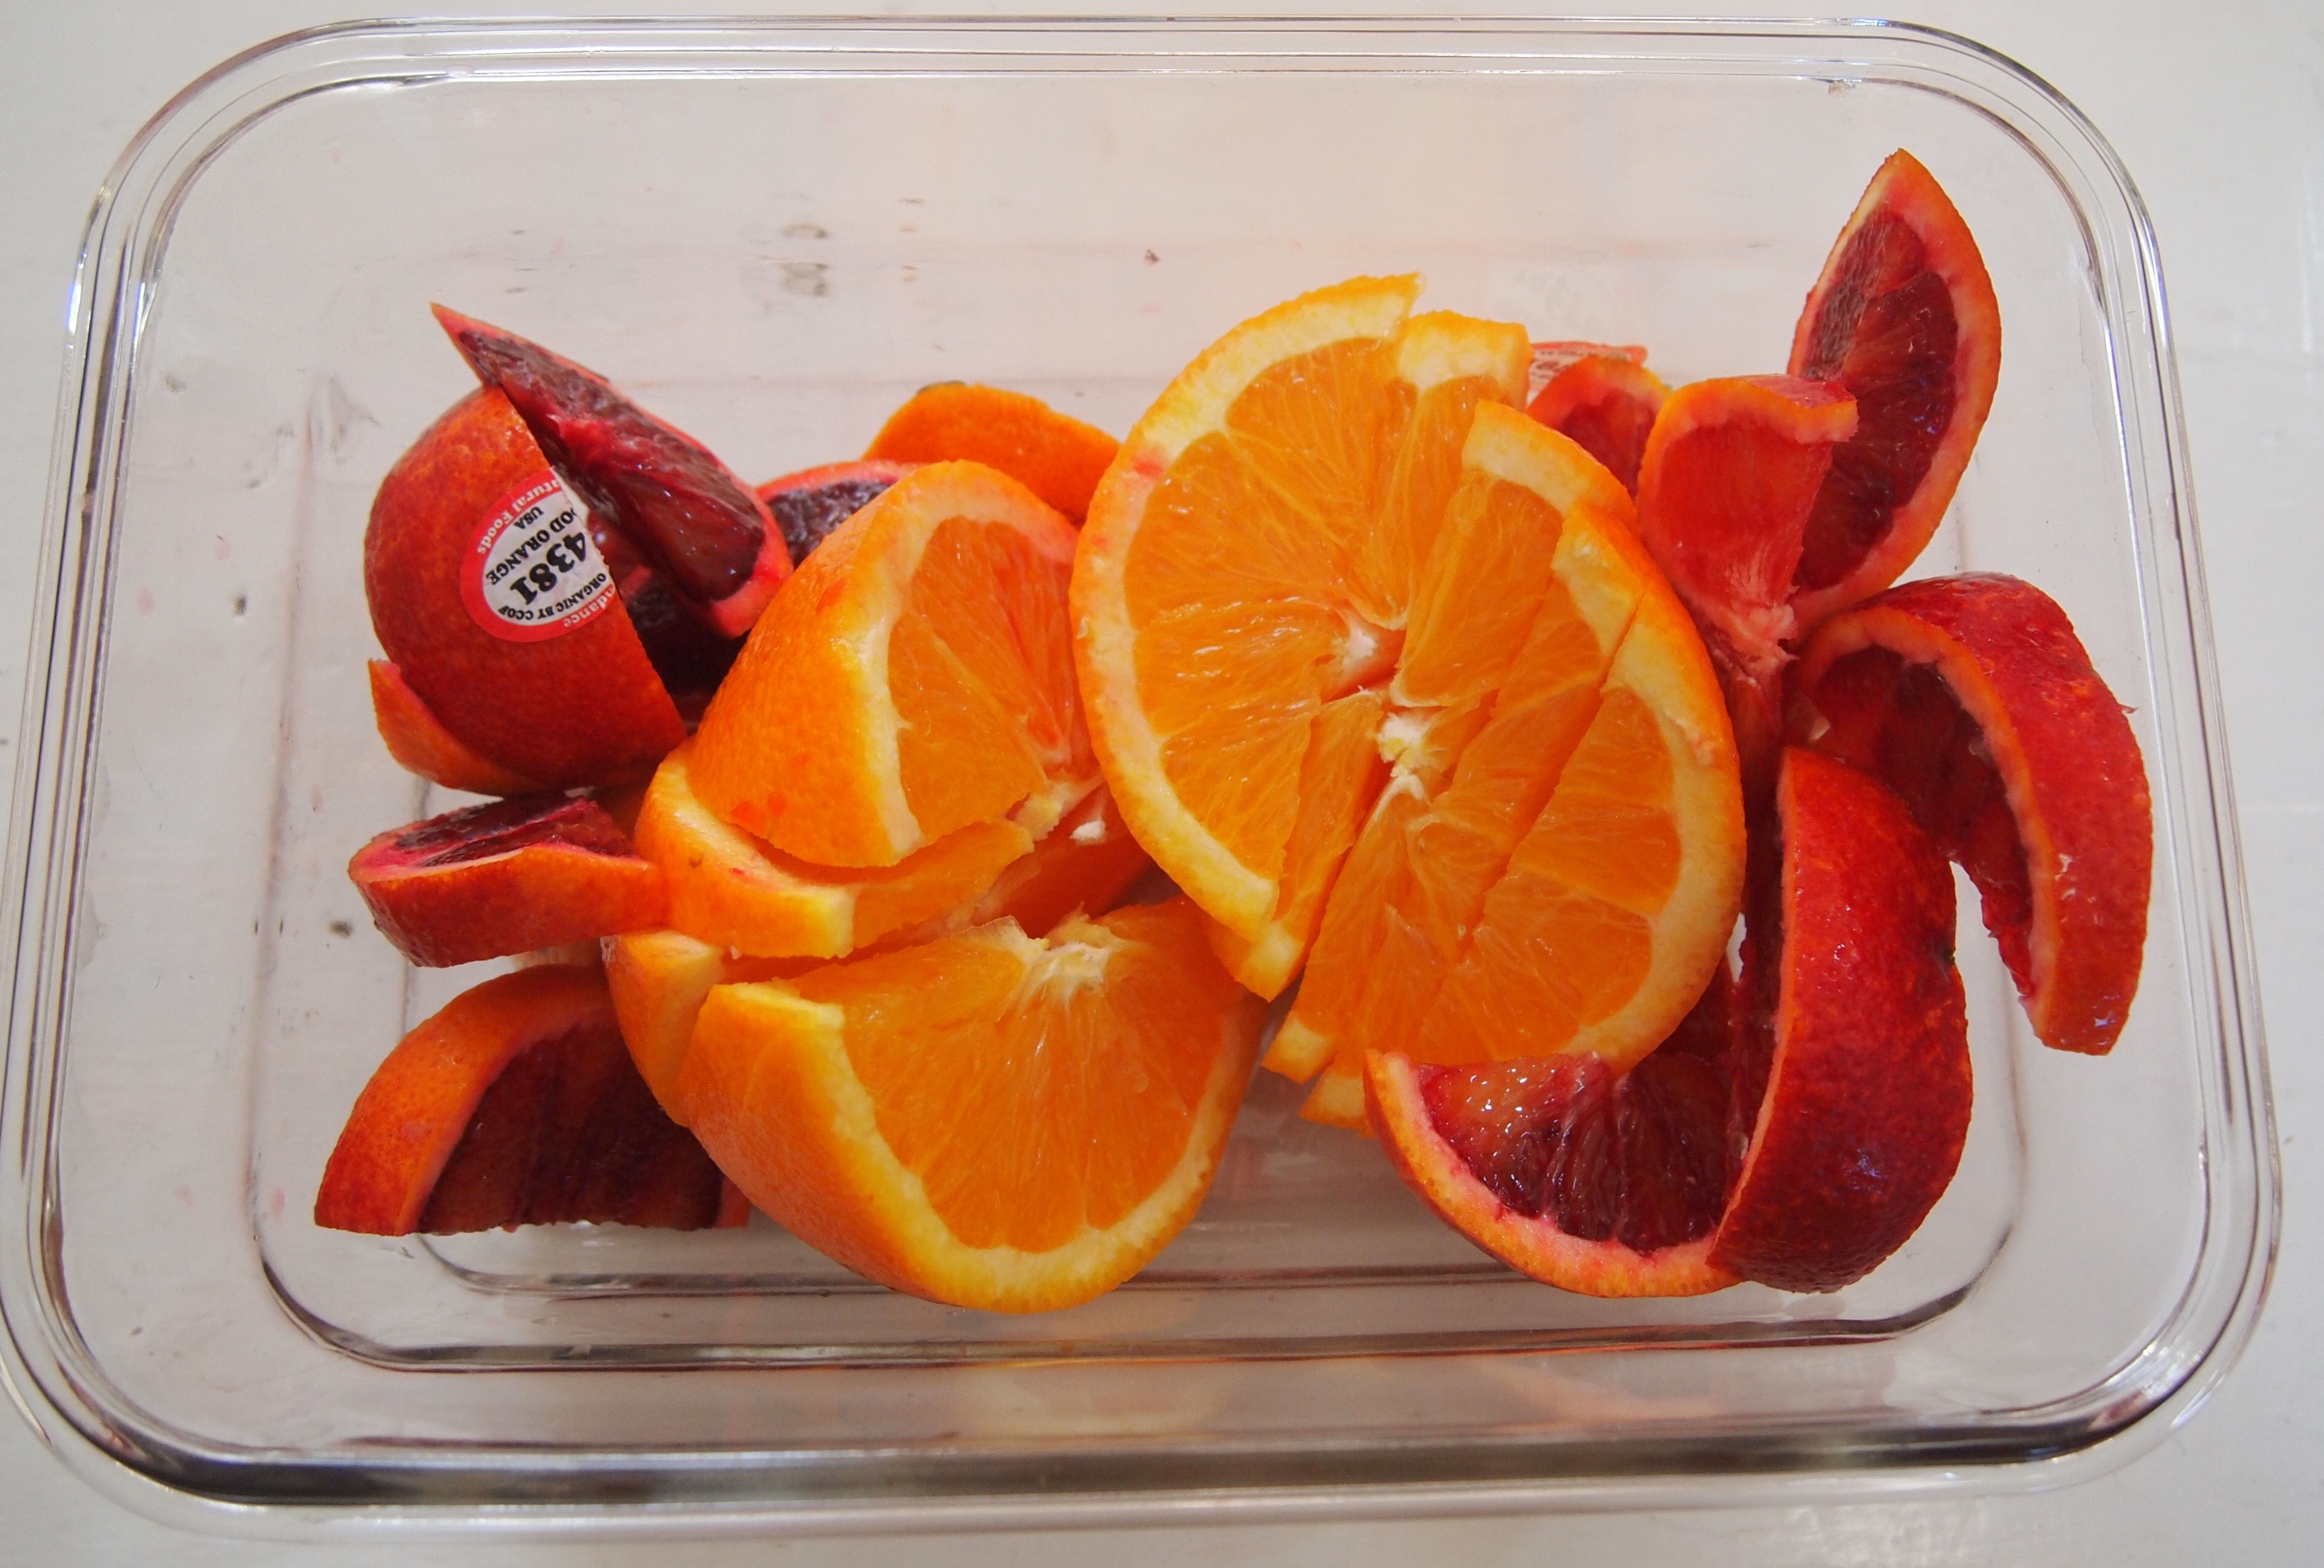 Organic Navel and Blood Oranges - ready to enjoy in the car. Plan to make healthy choices for your wellness journey.